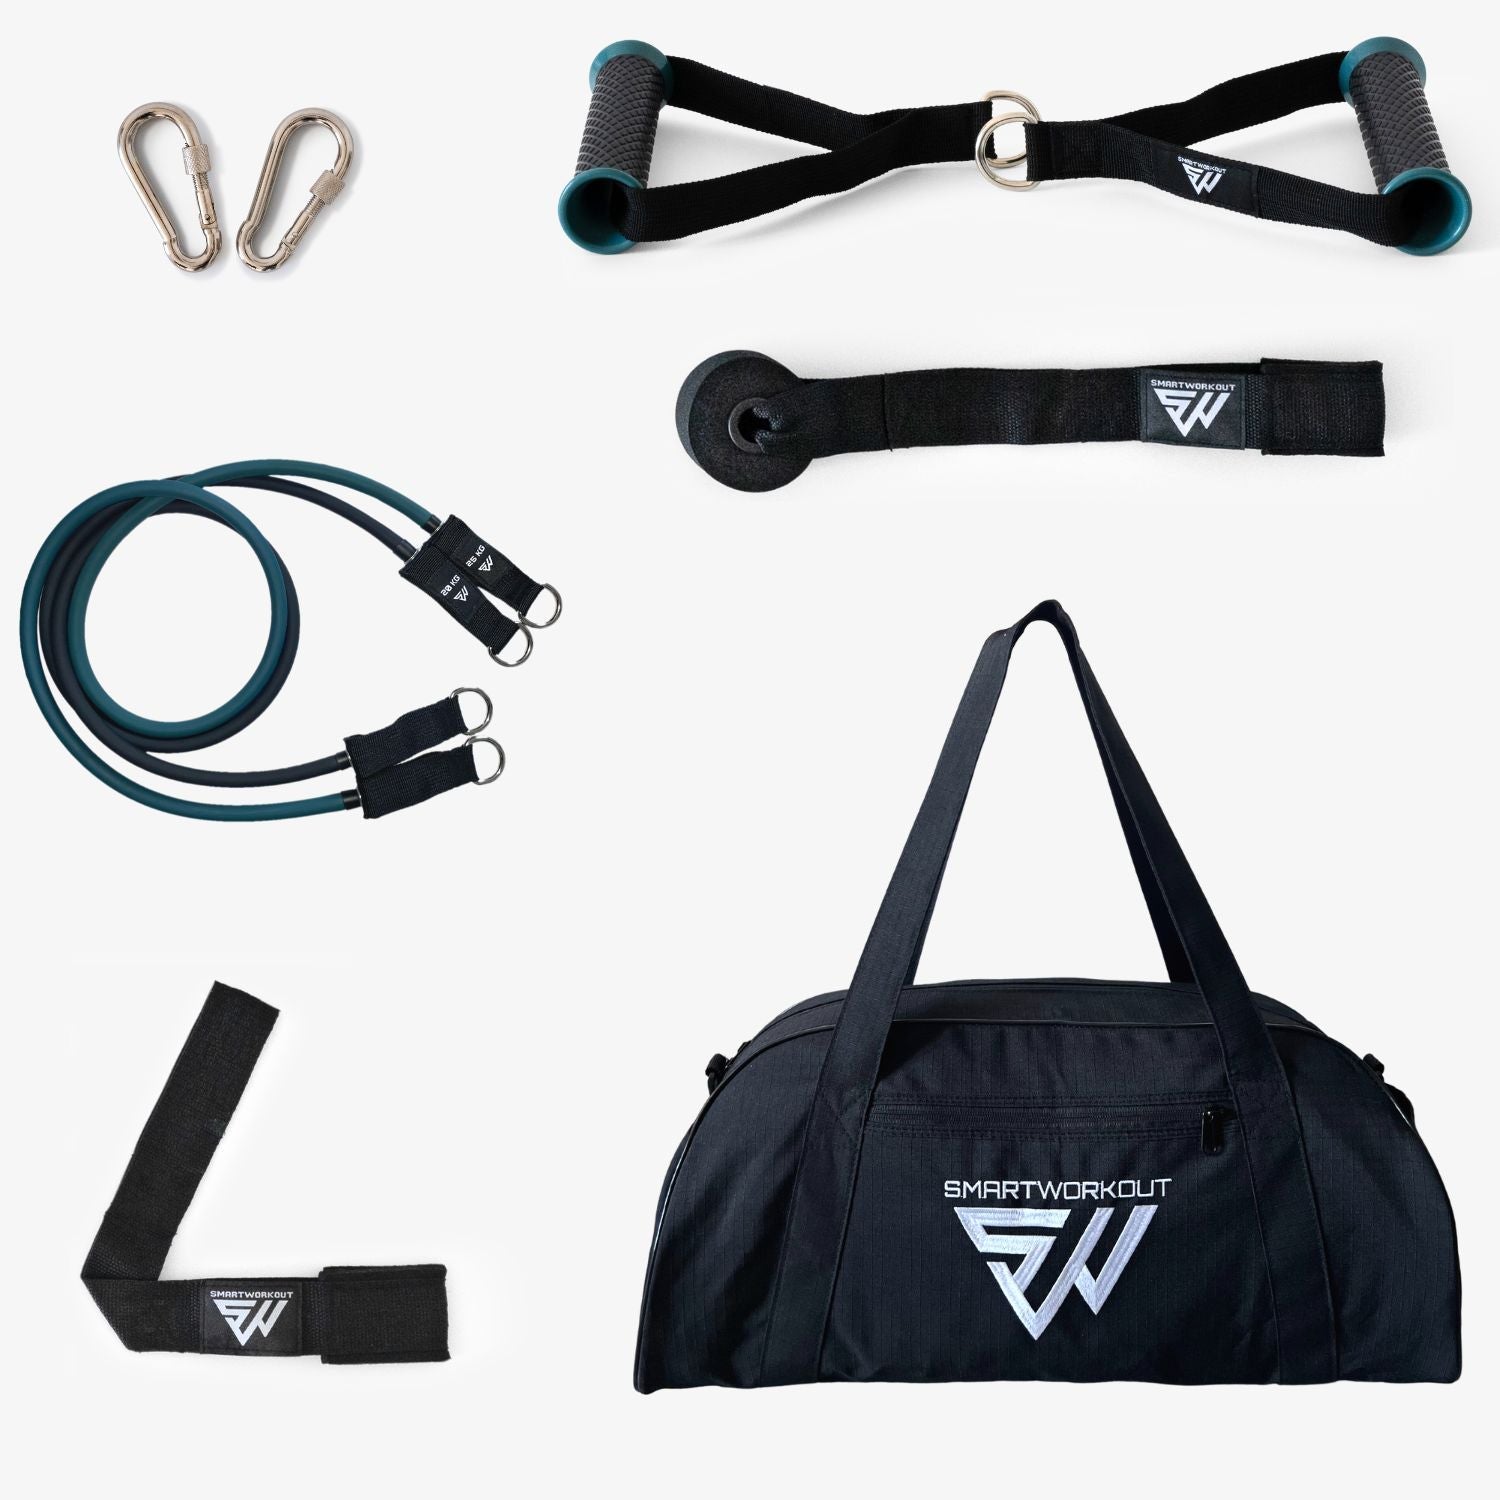 Accessories Bundles for resistance bands with bag